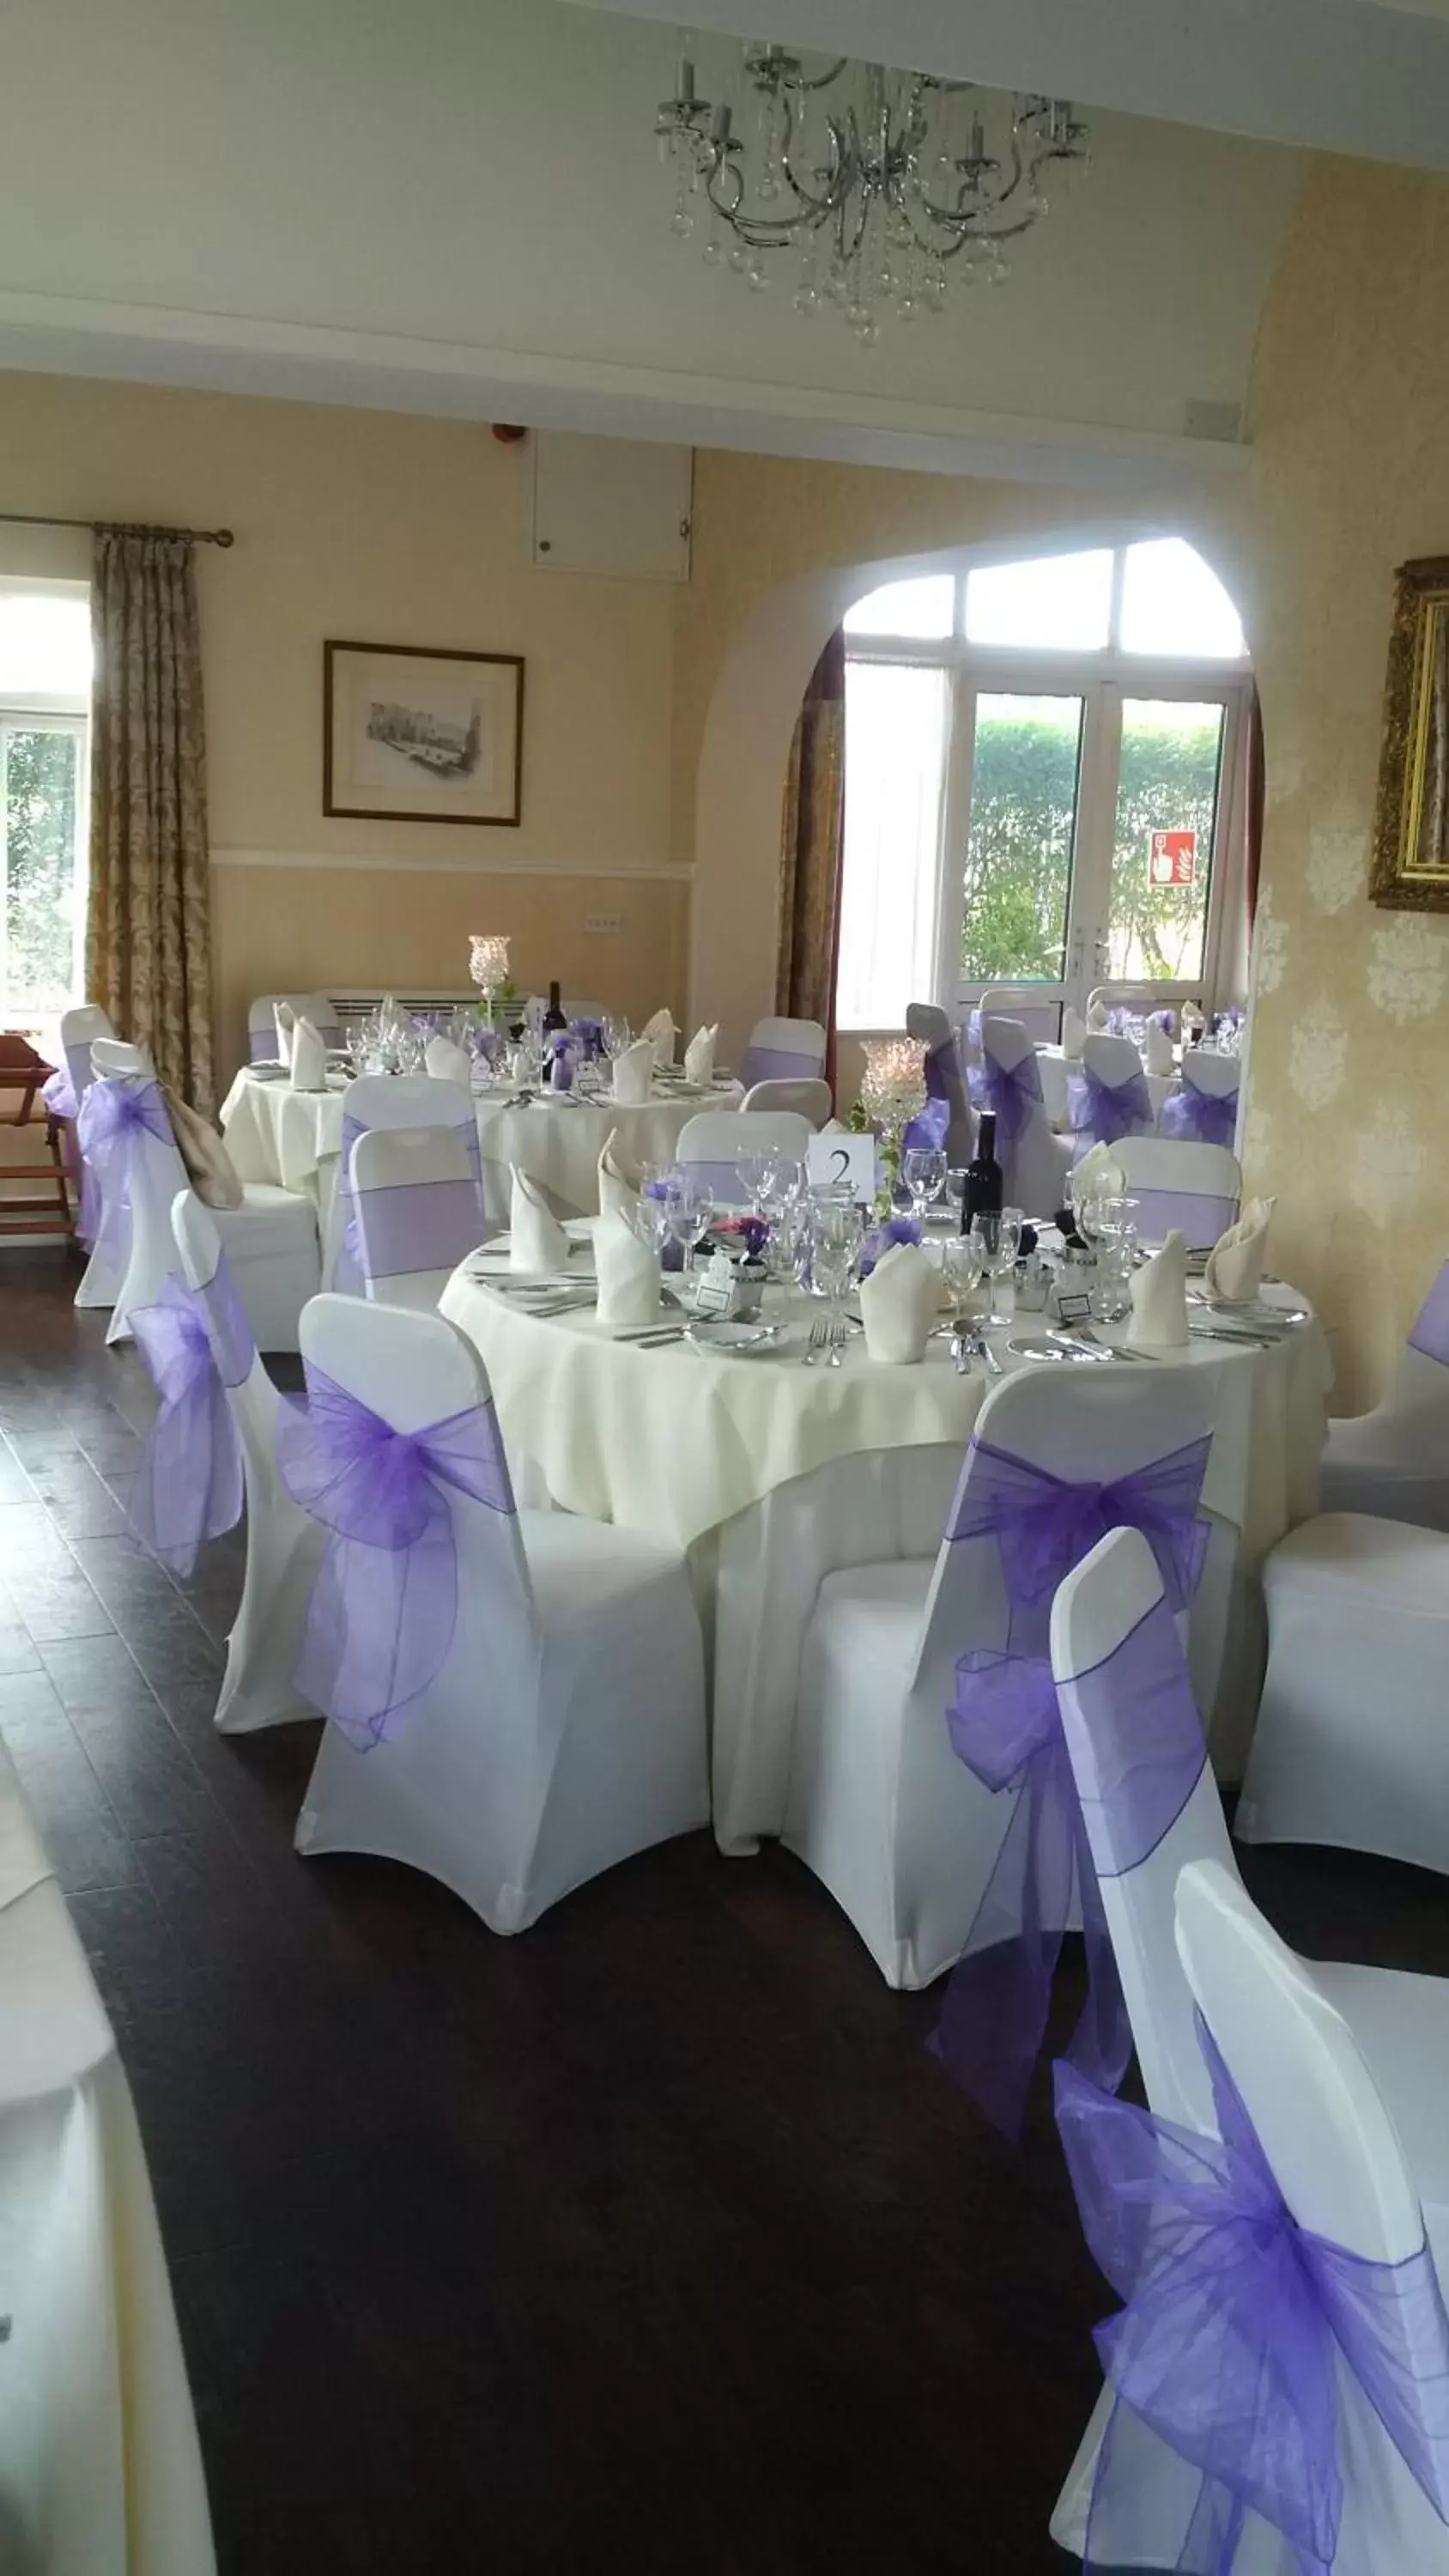 Banquet/Function facilities, Banquet Facilities in The Chetwynde Hotel